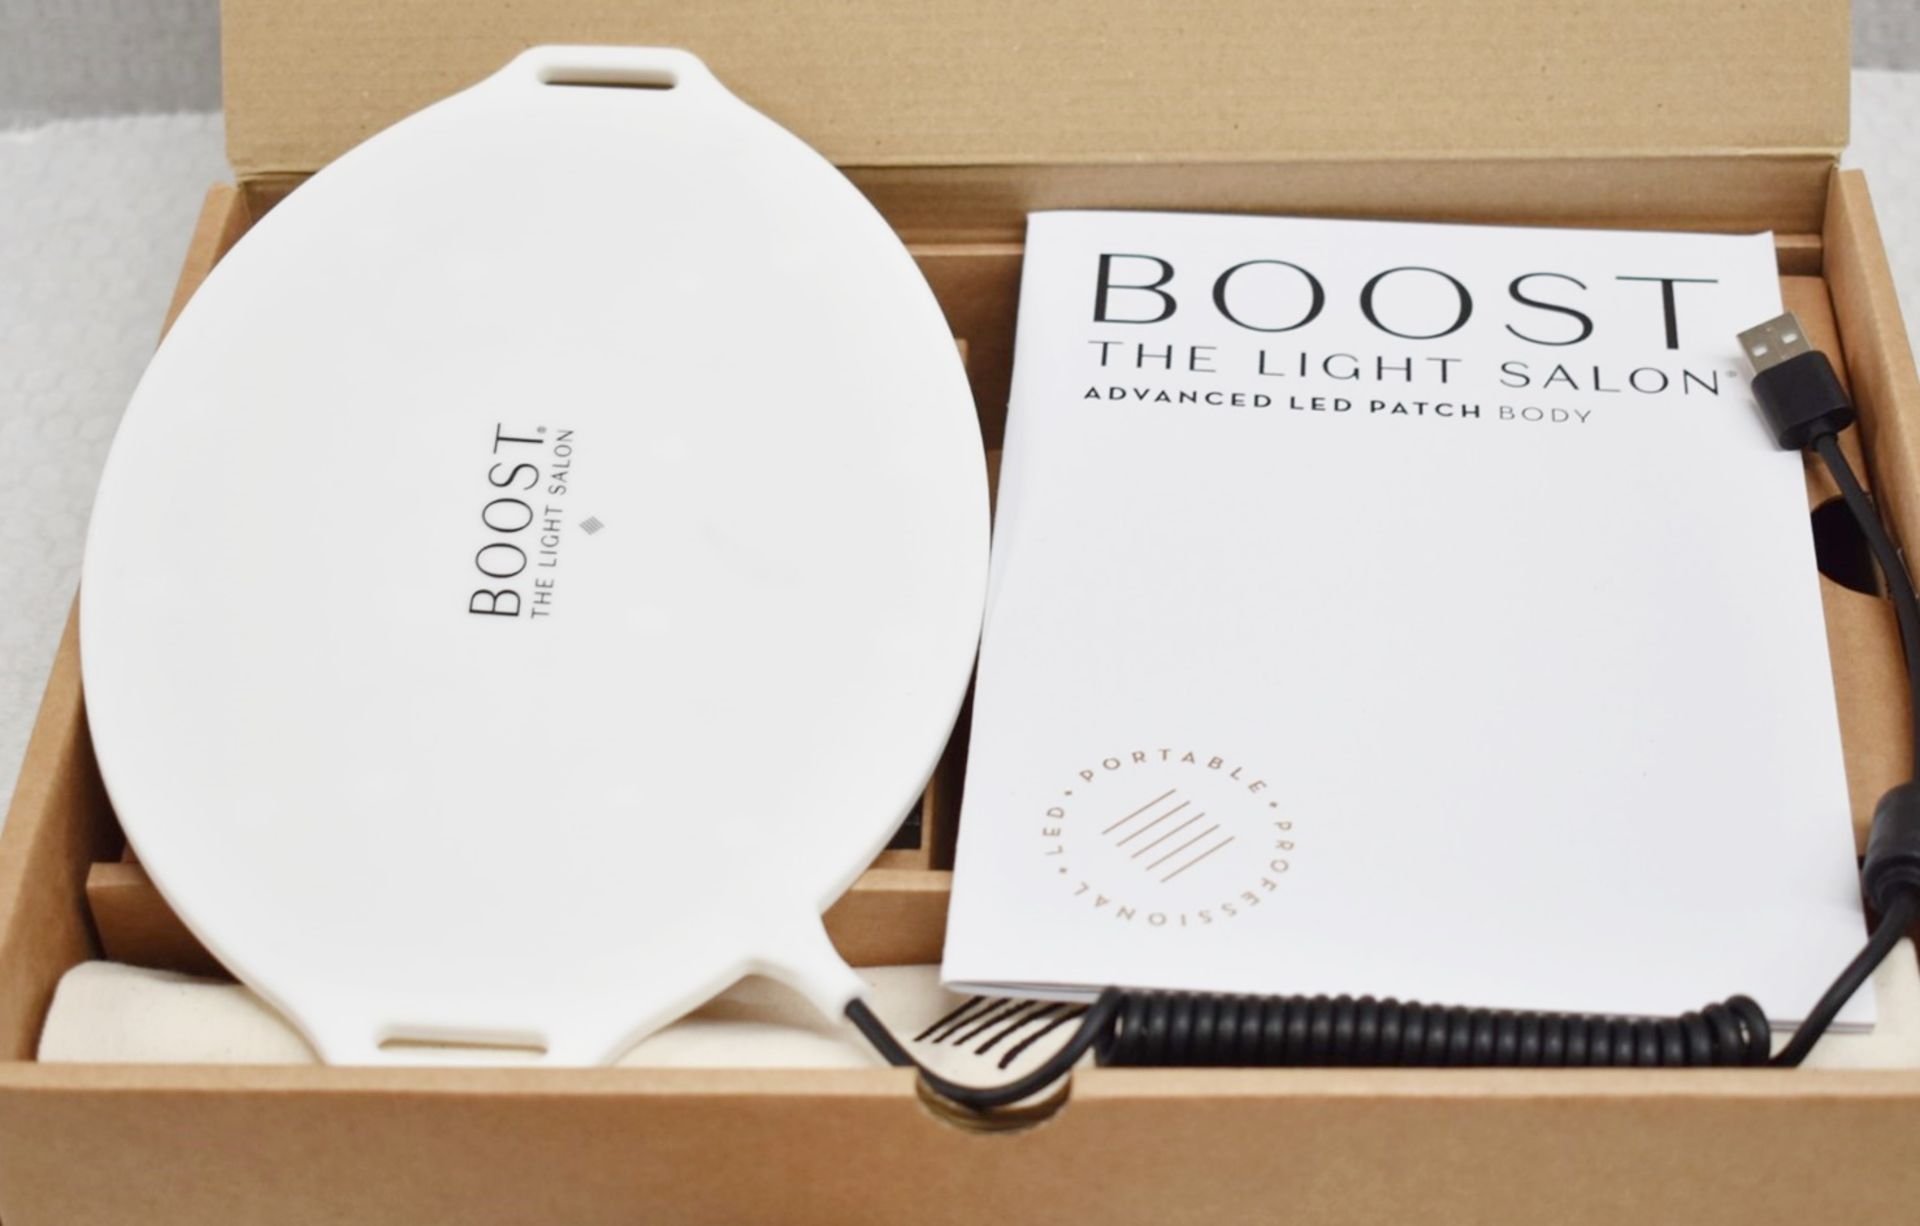 1 x THE LIGHT SALON 'Boost' Anti-inflammatory LED Body Patch - Original Price £375.00 - Unused Boxed - Image 2 of 9